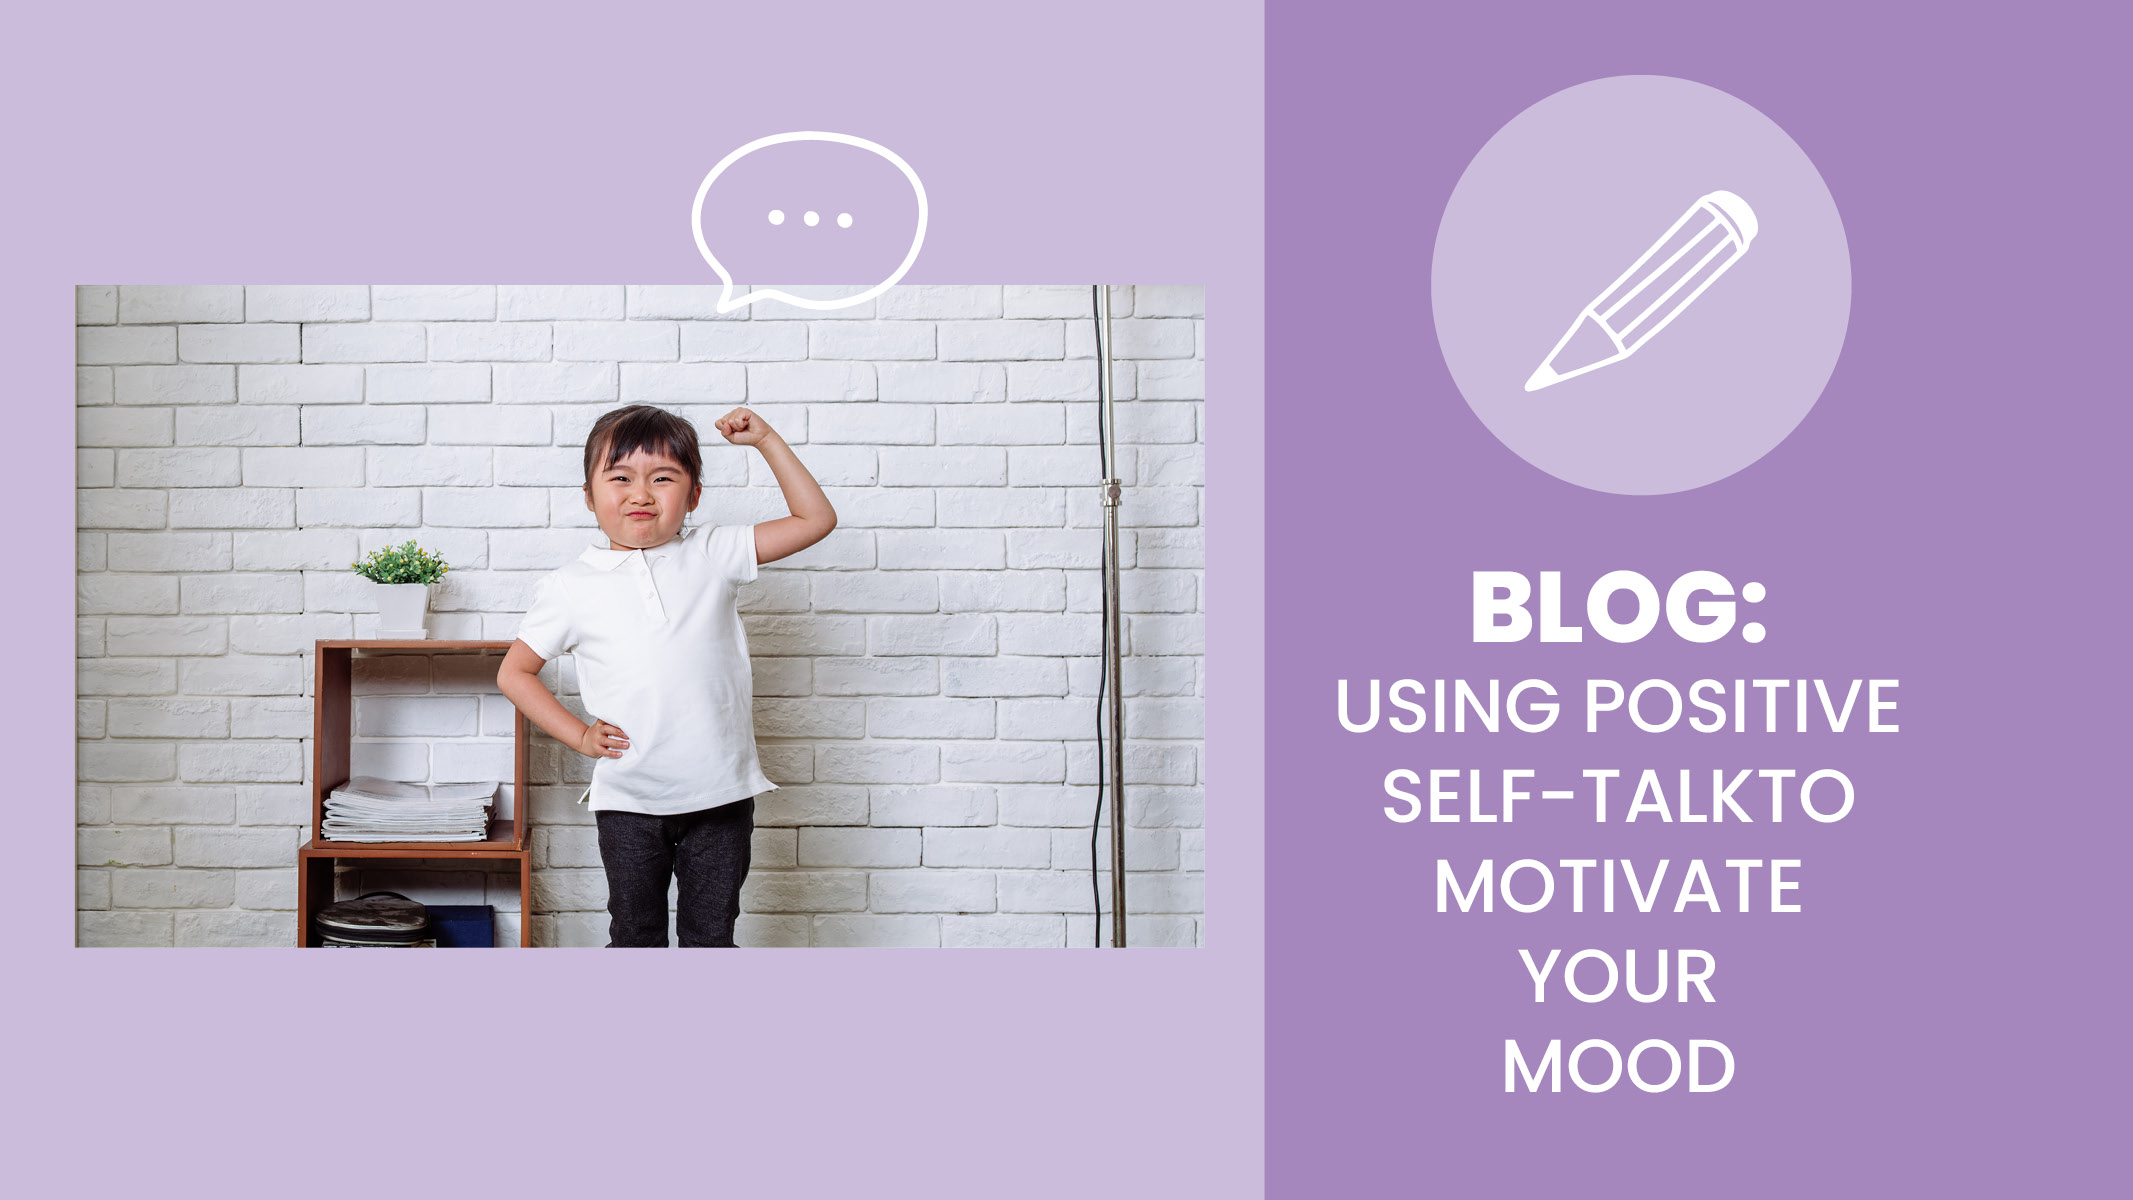 Young child flexes as they learn how to motivate themselves